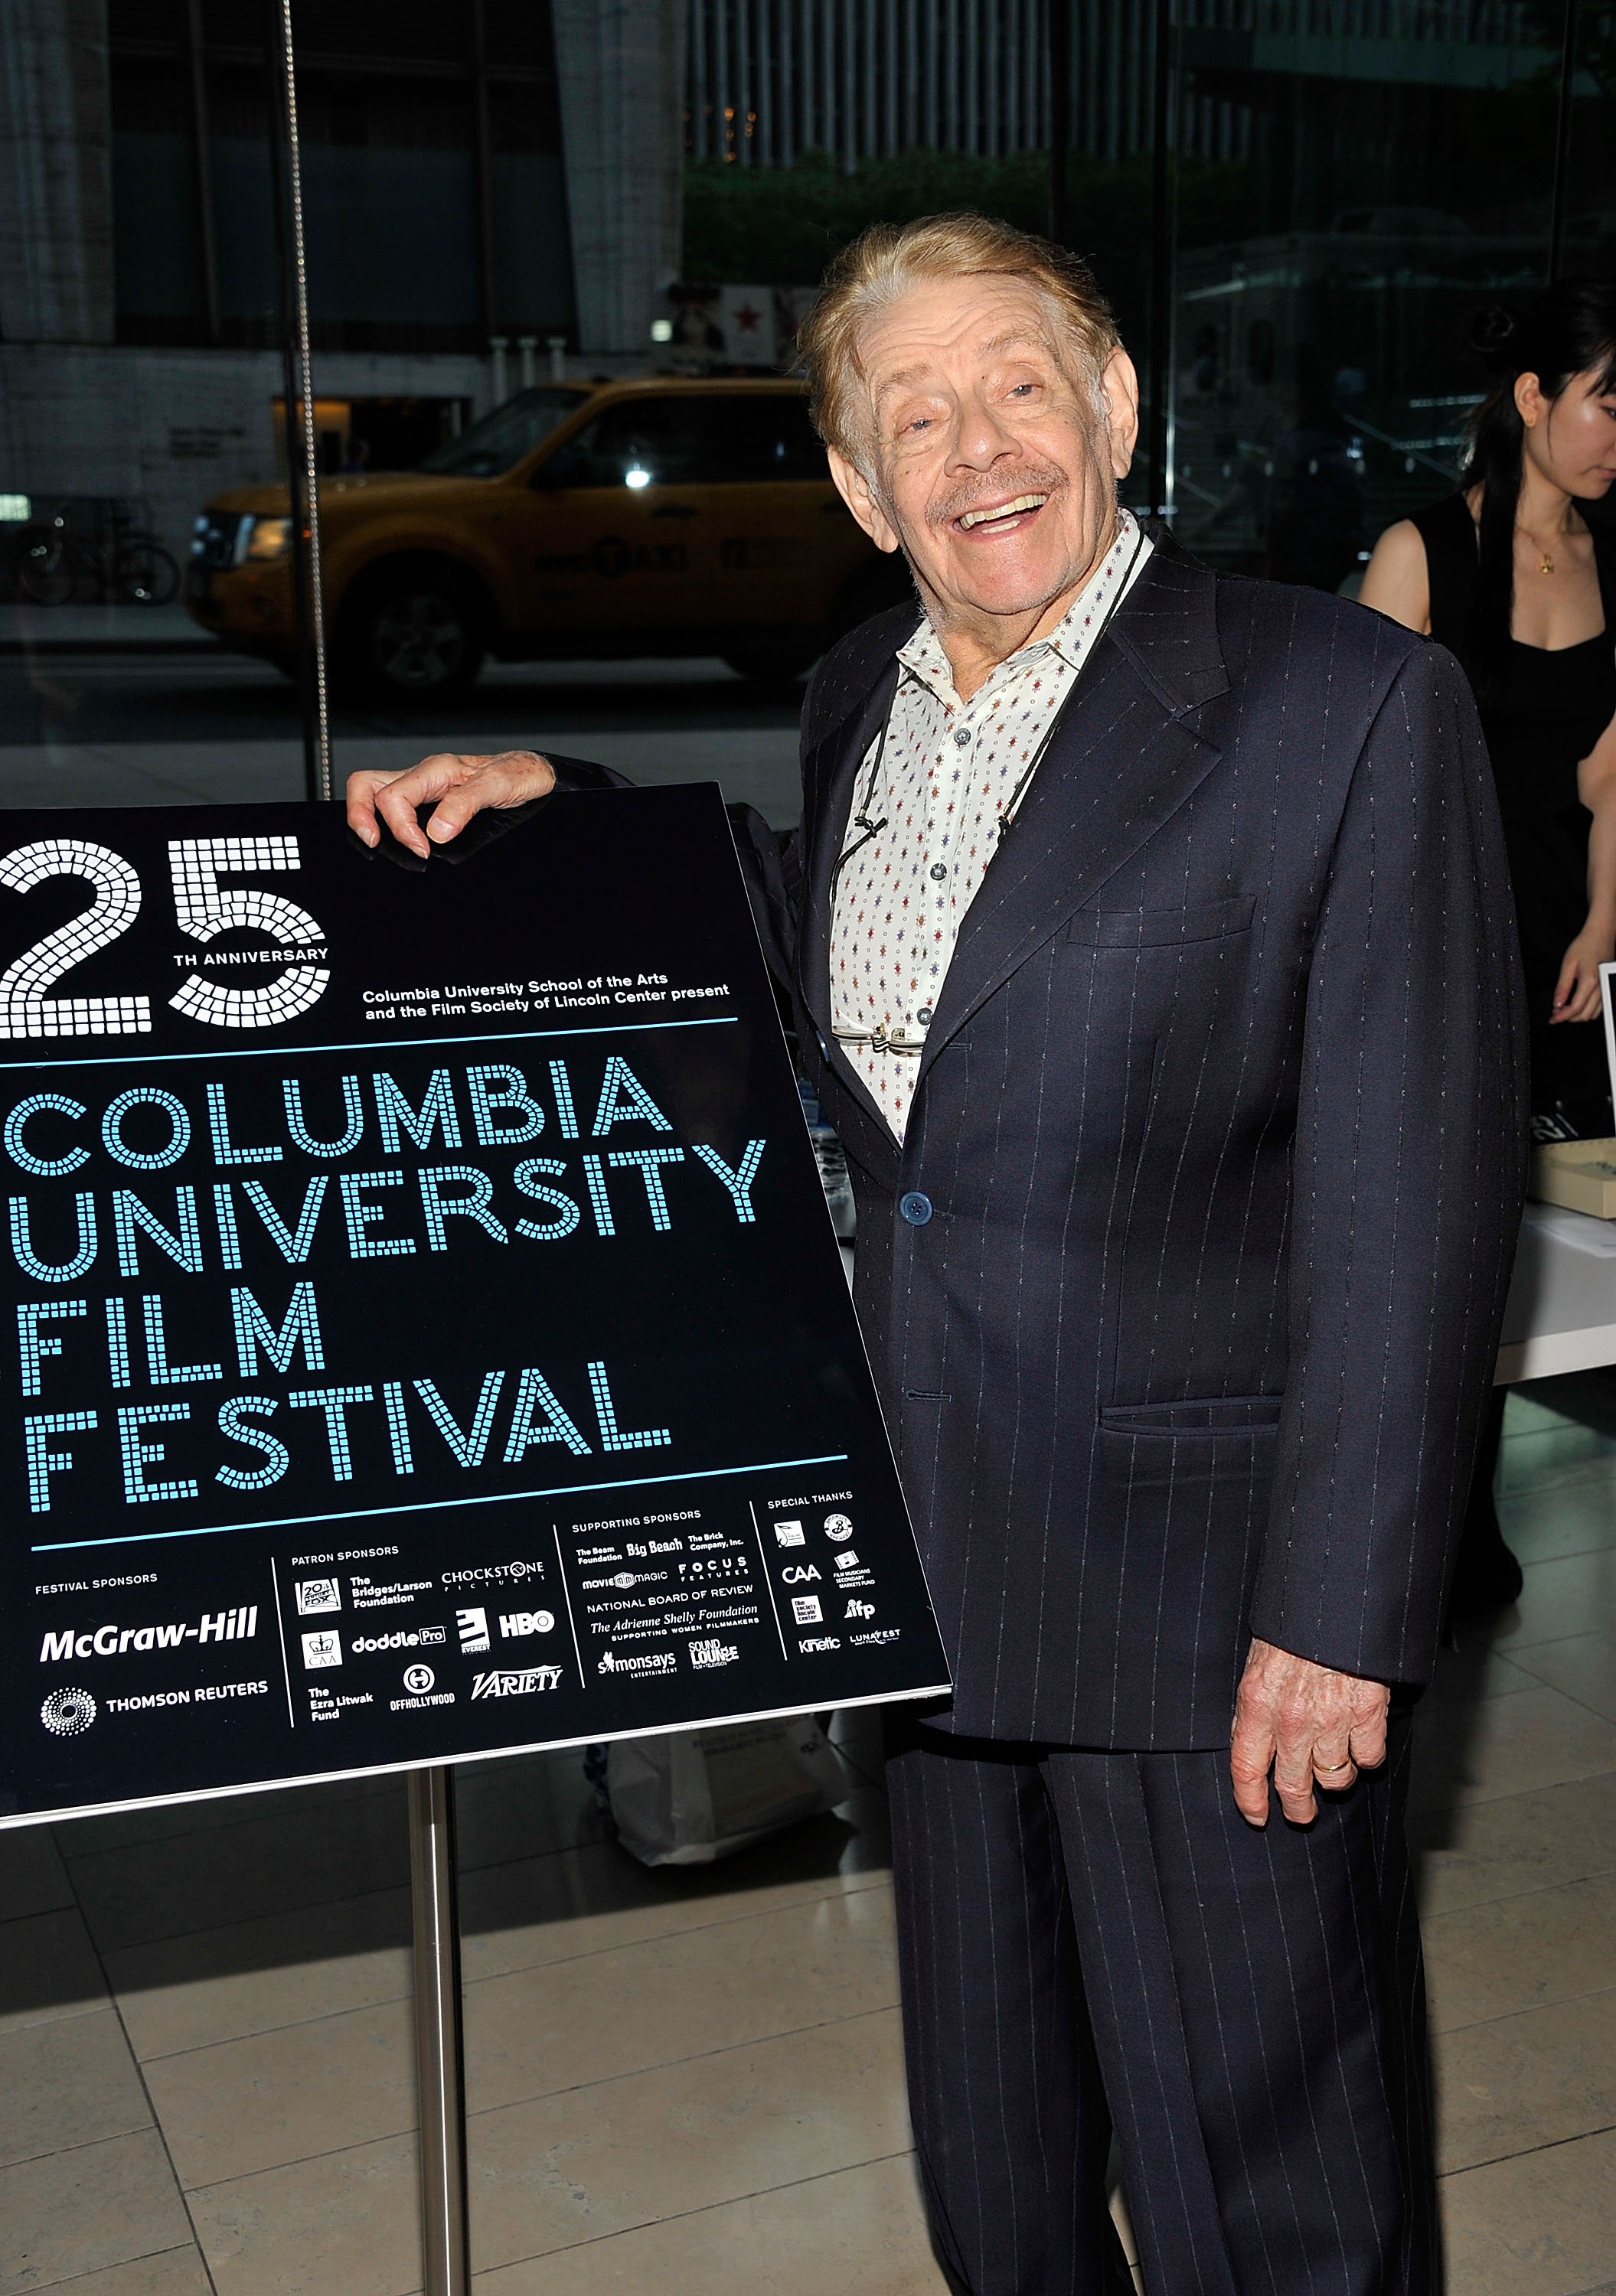 Jerry Stiller attends the 25th anniversary of Columbia University's Film Festival at Alice Tully Hall on May 4, 2012 in New York City. | Photo: GettyImages